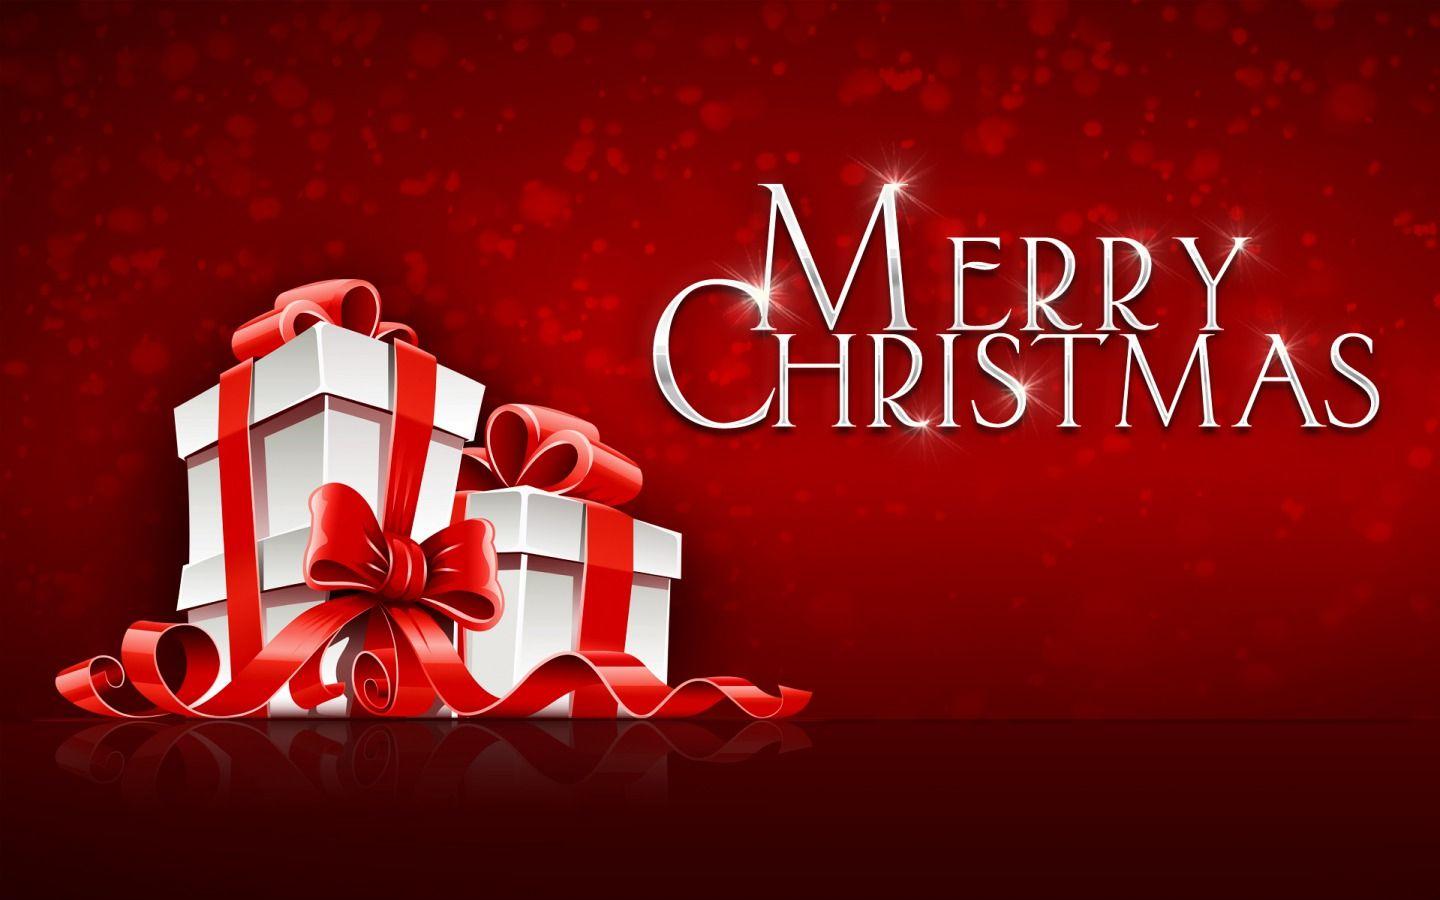 Merry Christmas Wallpaper HD Free Download. Only HD wallpaper